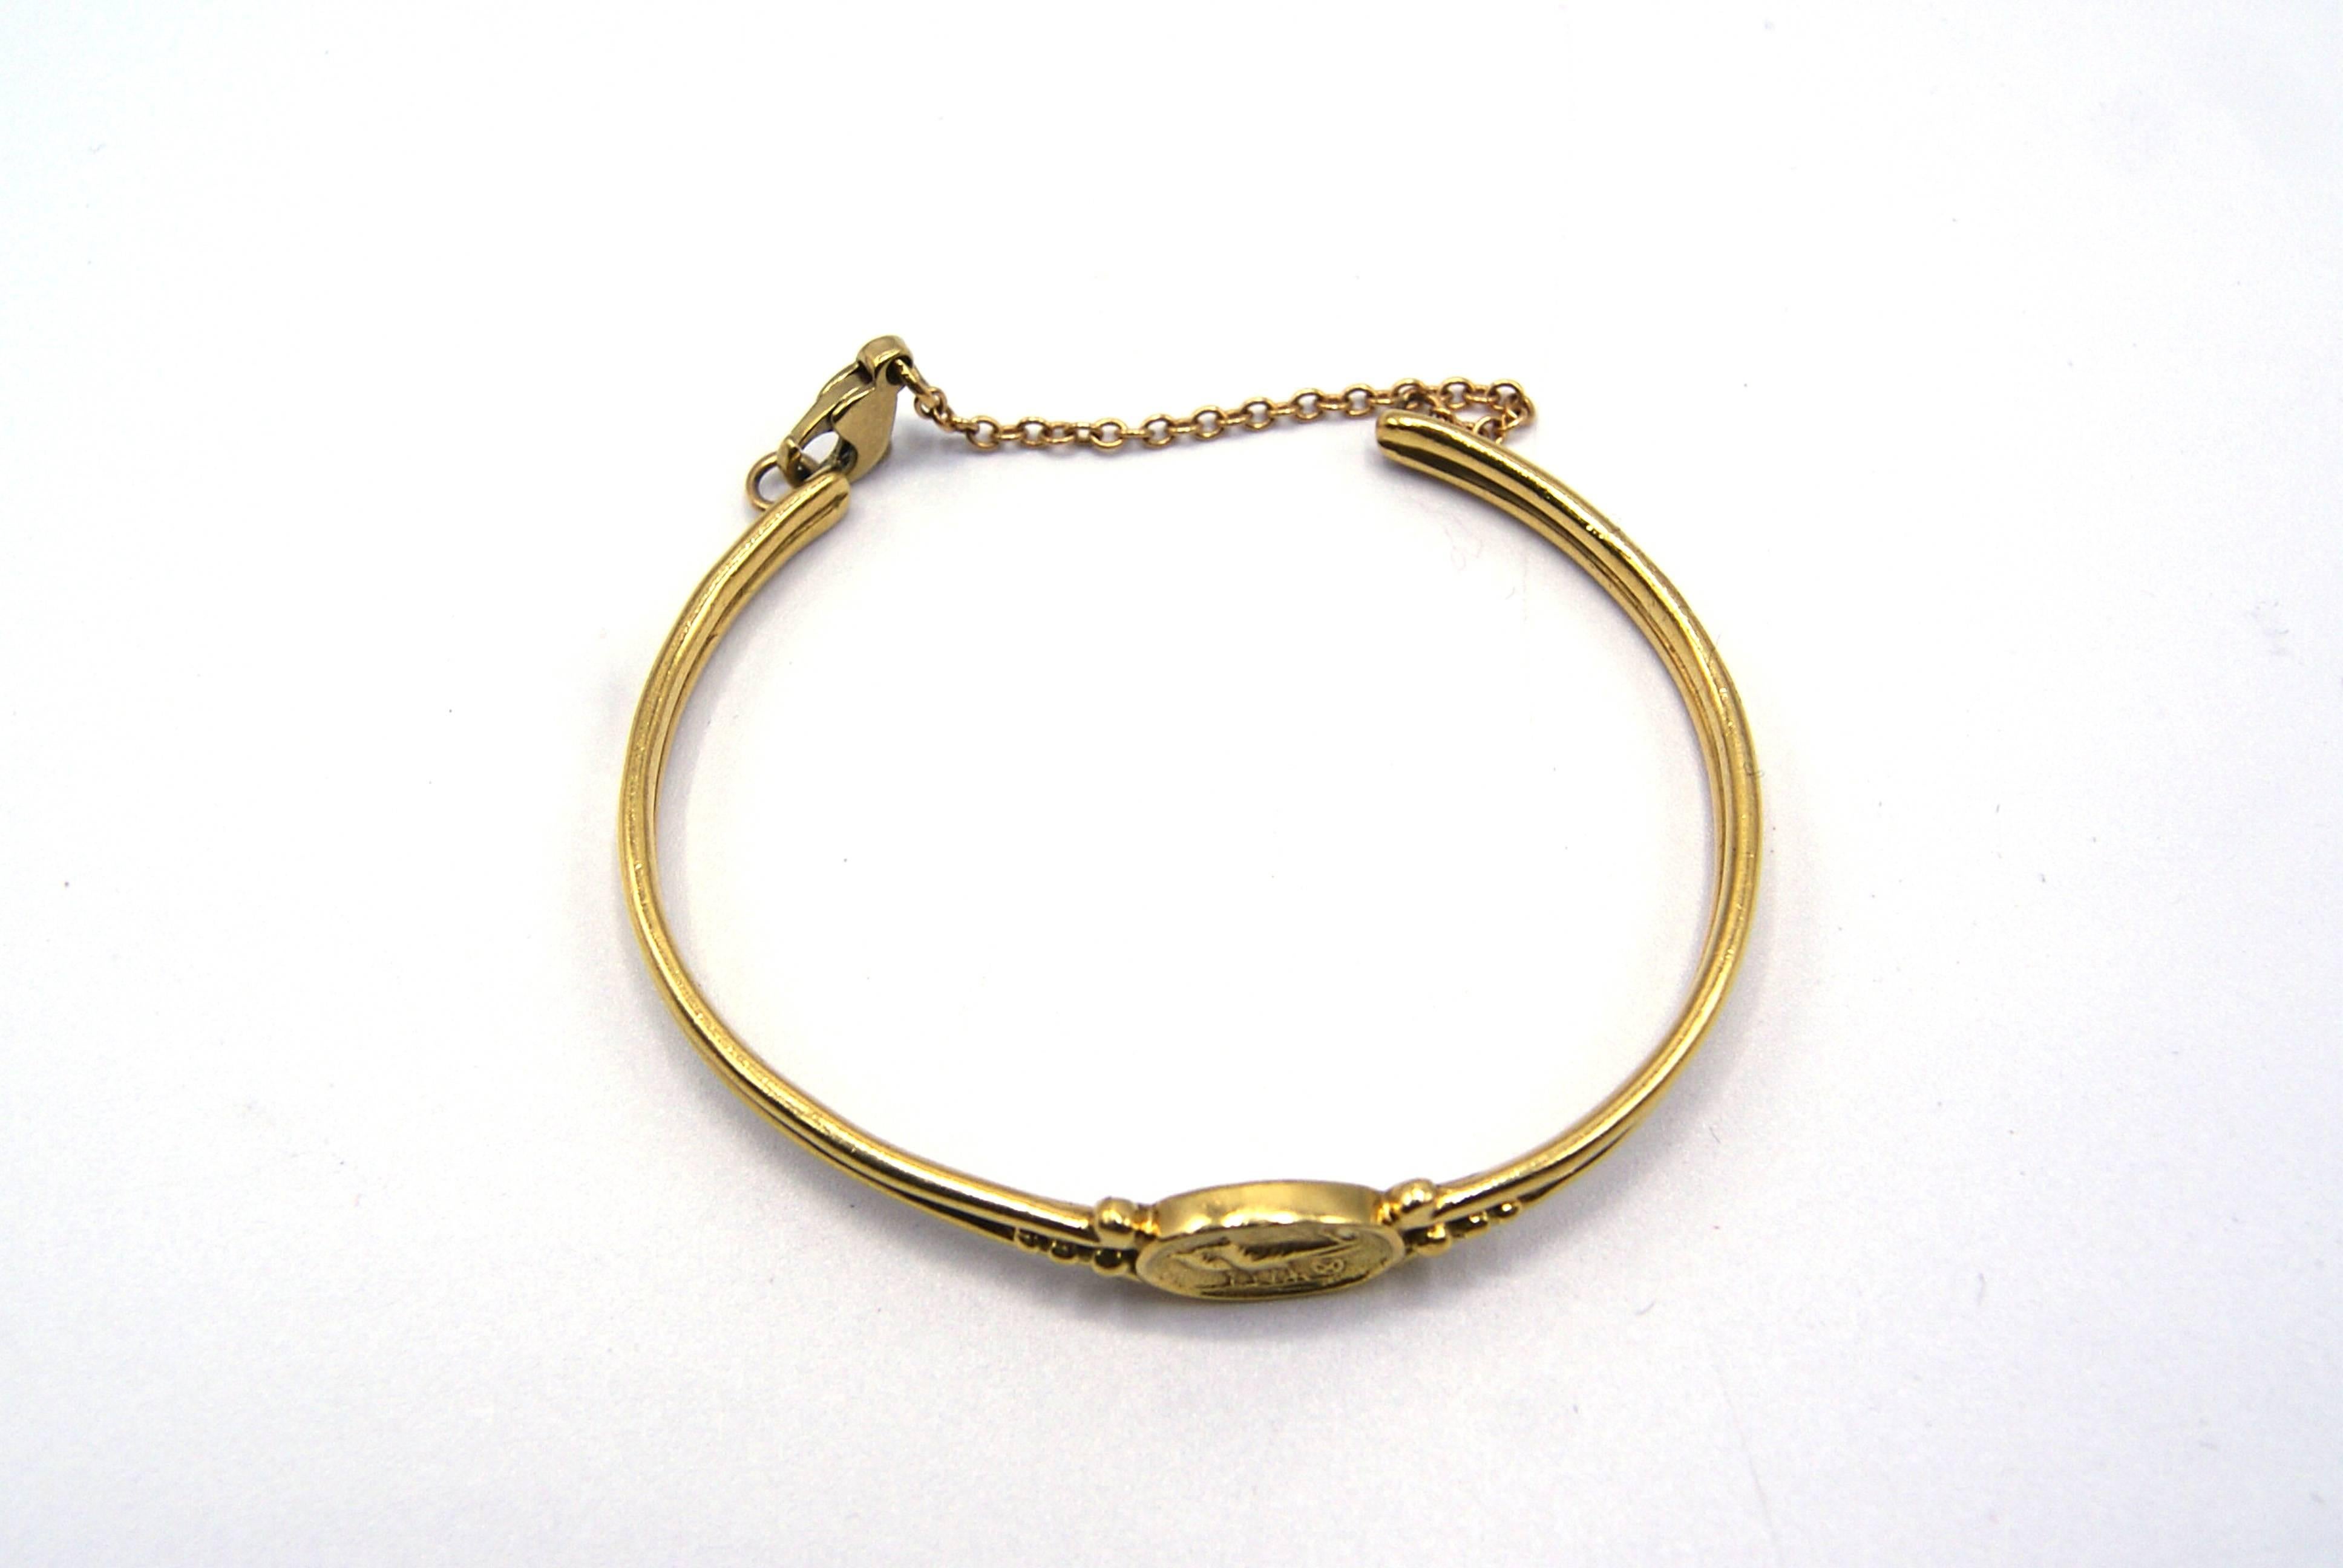 Beautifully 18 karat yellow gold bangle bracelet by New York jewelry designer Helen Woodhull. This bangle is from Woodhull's Egyptian Revival collection and the center plaque resembling an ancient coin with a pair of Ravens. Helen Woodhull has a